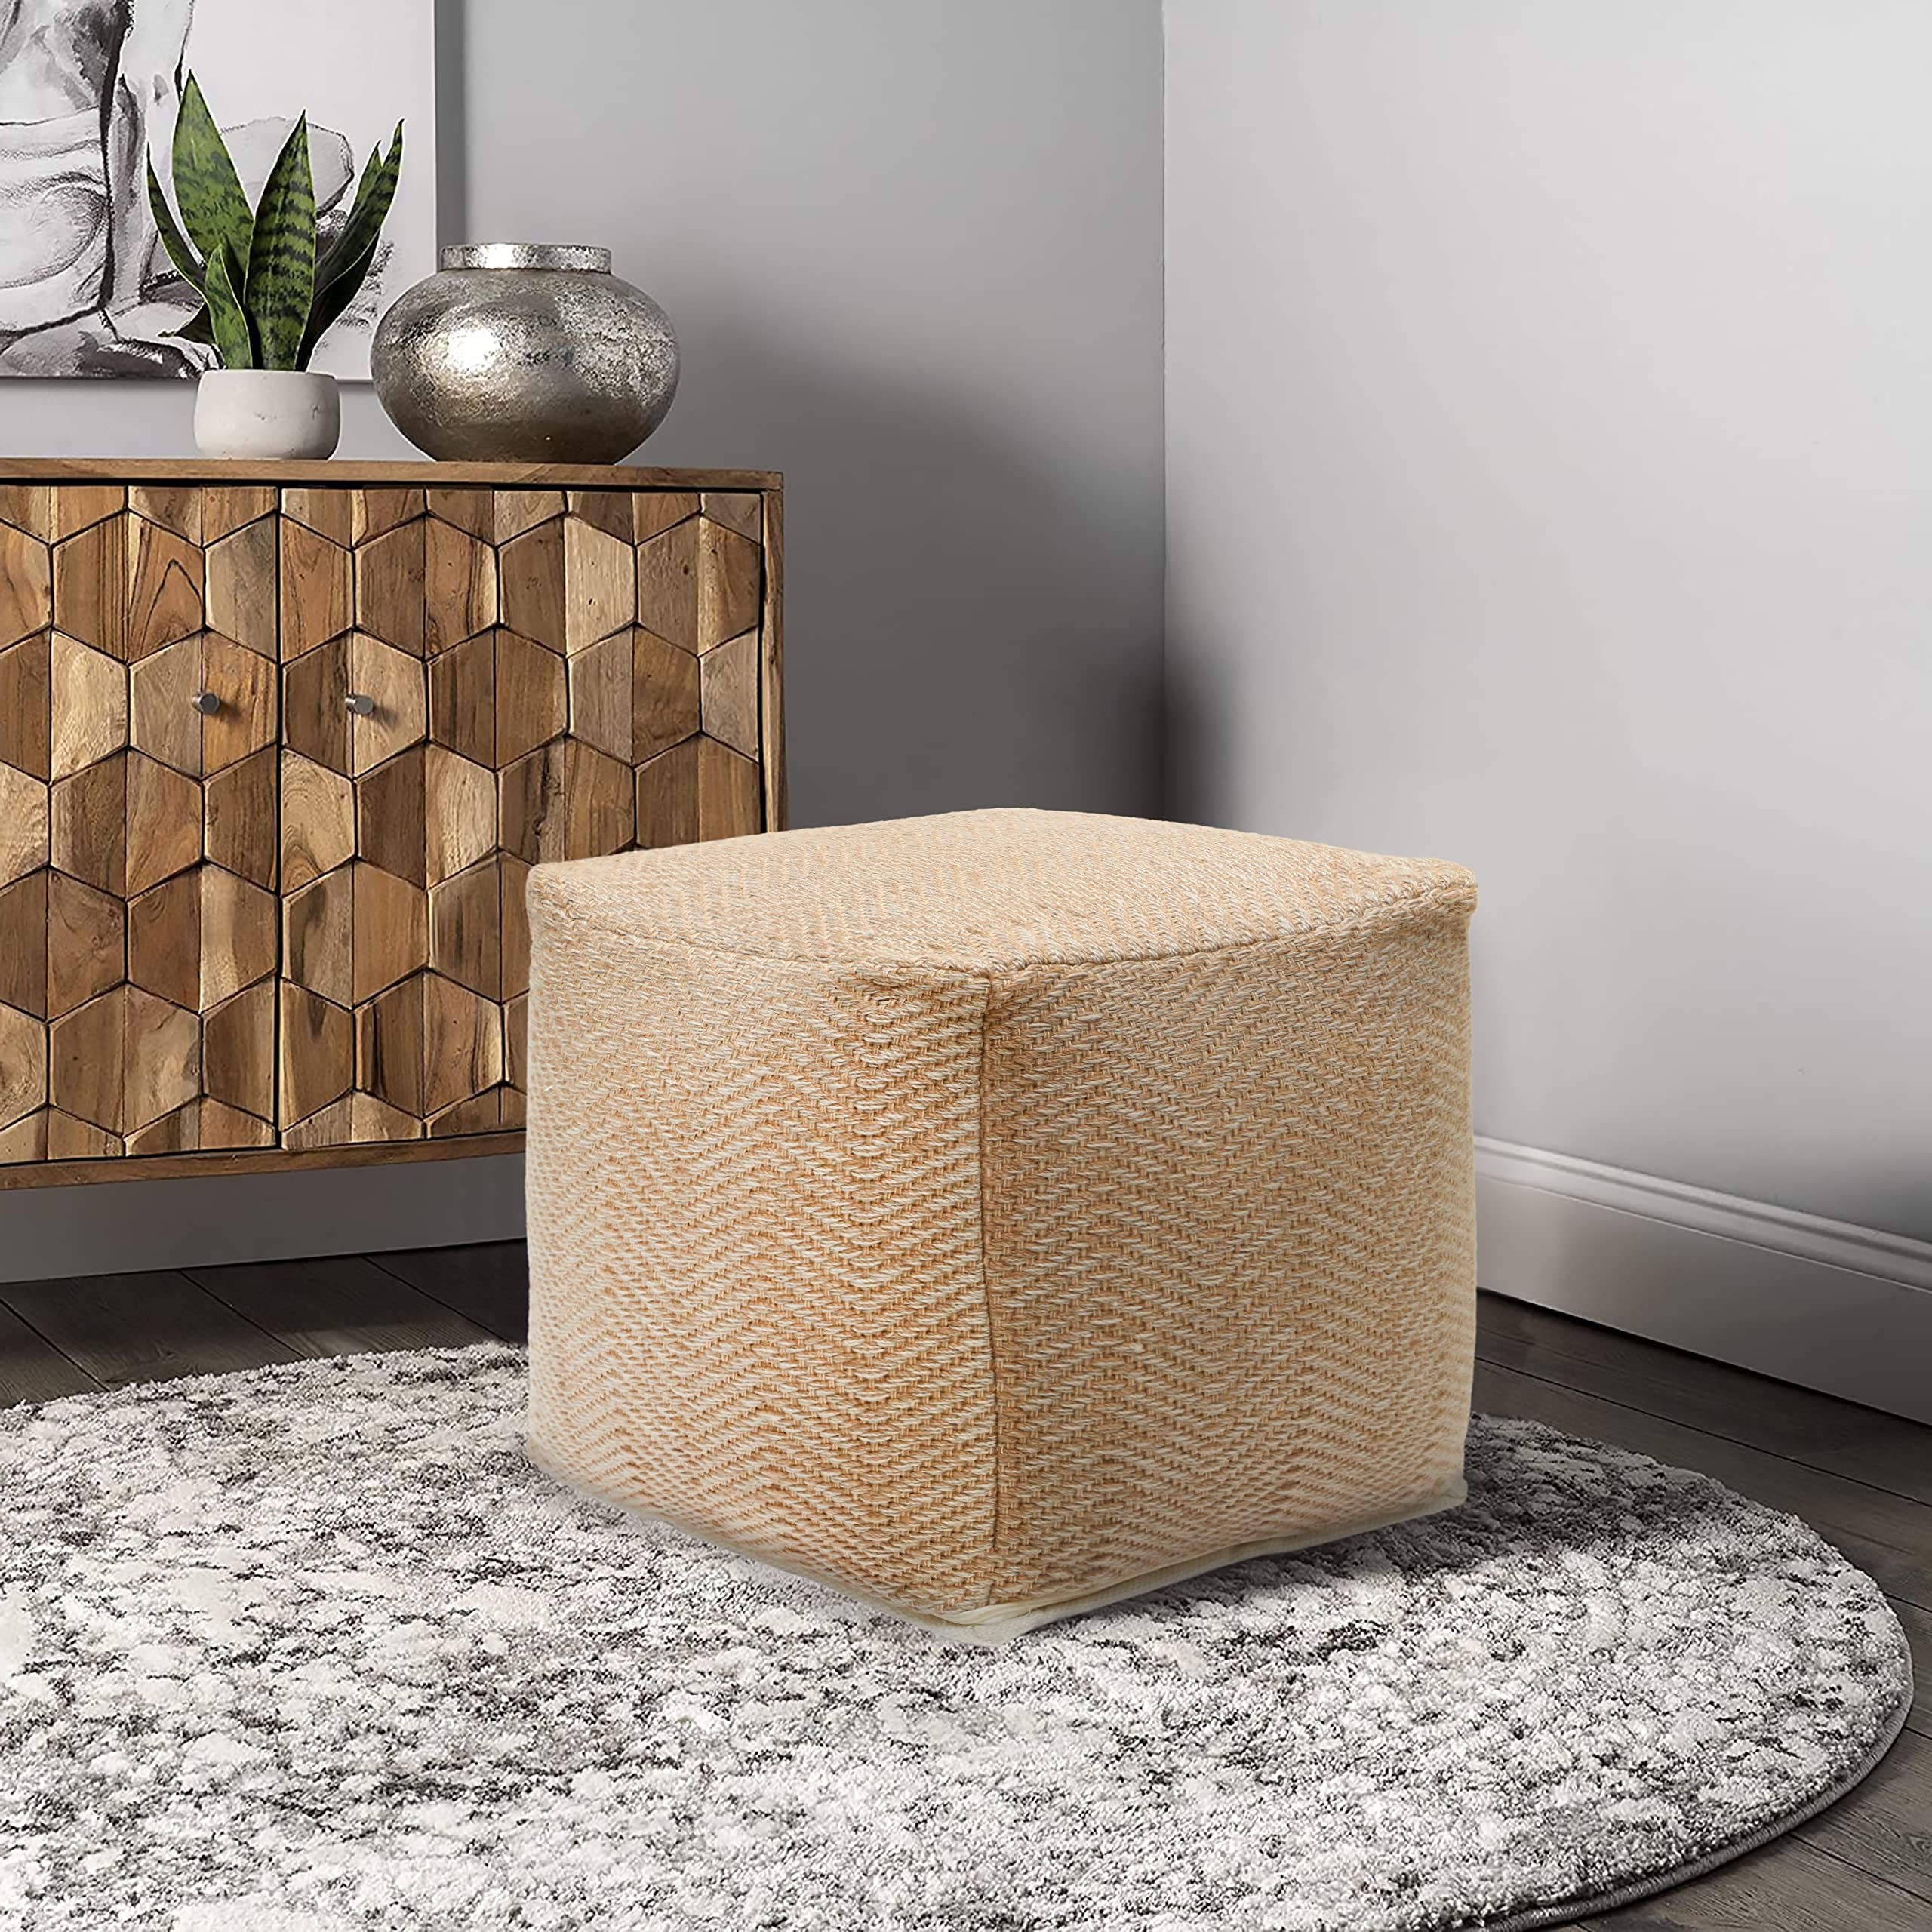 [%amazon: Woven St. Hand Woven Ottoman Indoor/outdoor Pouf | 100%  Polyester | Footrest | Zipper Cover With Filling | Printed Floor Chair |  For Living Room, Bedroom, Kids Room |16x16x16 Inch – Taupe : Home & Kitchen Inside Most Popular Polyester Handwoven Ottomans|polyester Handwoven Ottomans Pertaining To Popular Amazon: Woven St. Hand Woven Ottoman Indoor/outdoor Pouf | 100%  Polyester | Footrest | Zipper Cover With Filling | Printed Floor Chair |  For Living Room, Bedroom, Kids Room |16x16x16 Inch – Taupe : Home & Kitchen|most Recent Polyester Handwoven Ottomans Throughout Amazon: Woven St. Hand Woven Ottoman Indoor/outdoor Pouf | 100%  Polyester | Footrest | Zipper Cover With Filling | Printed Floor Chair |  For Living Room, Bedroom, Kids Room |16x16x16 Inch – Taupe : Home & Kitchen|well Known Amazon: Woven St (View 1 of 10)